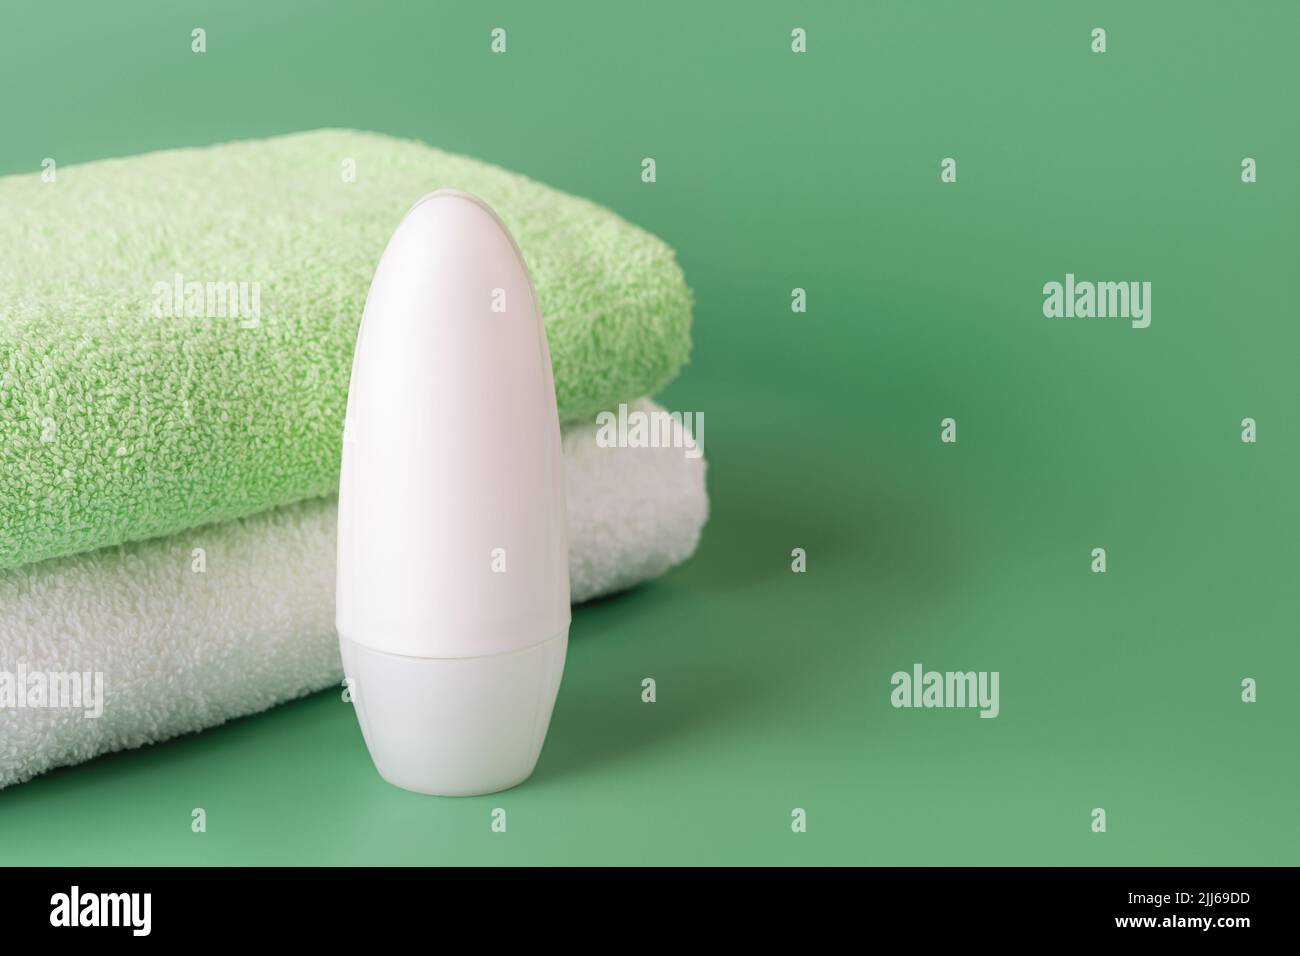 Roll on antiperspirant deodorant and bath towels on a green background. Cosmetics to reduce perspiration. Concept of personal hygiene items, body care Stock Photo